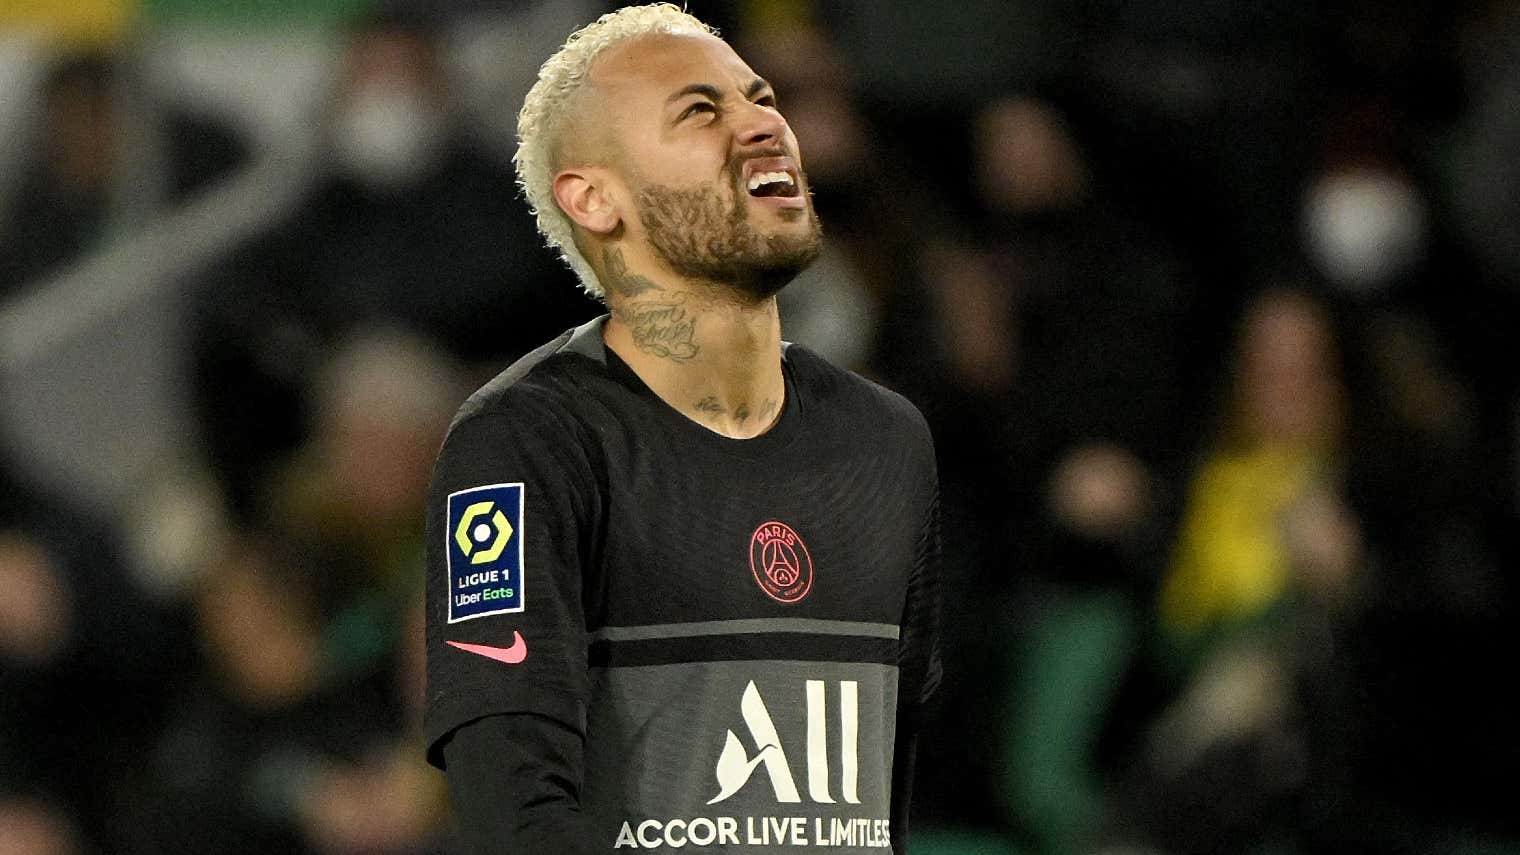 Watch: Neymar&#39;s awful penalty miss in shocking PSG performance against Nantes | Goal.com